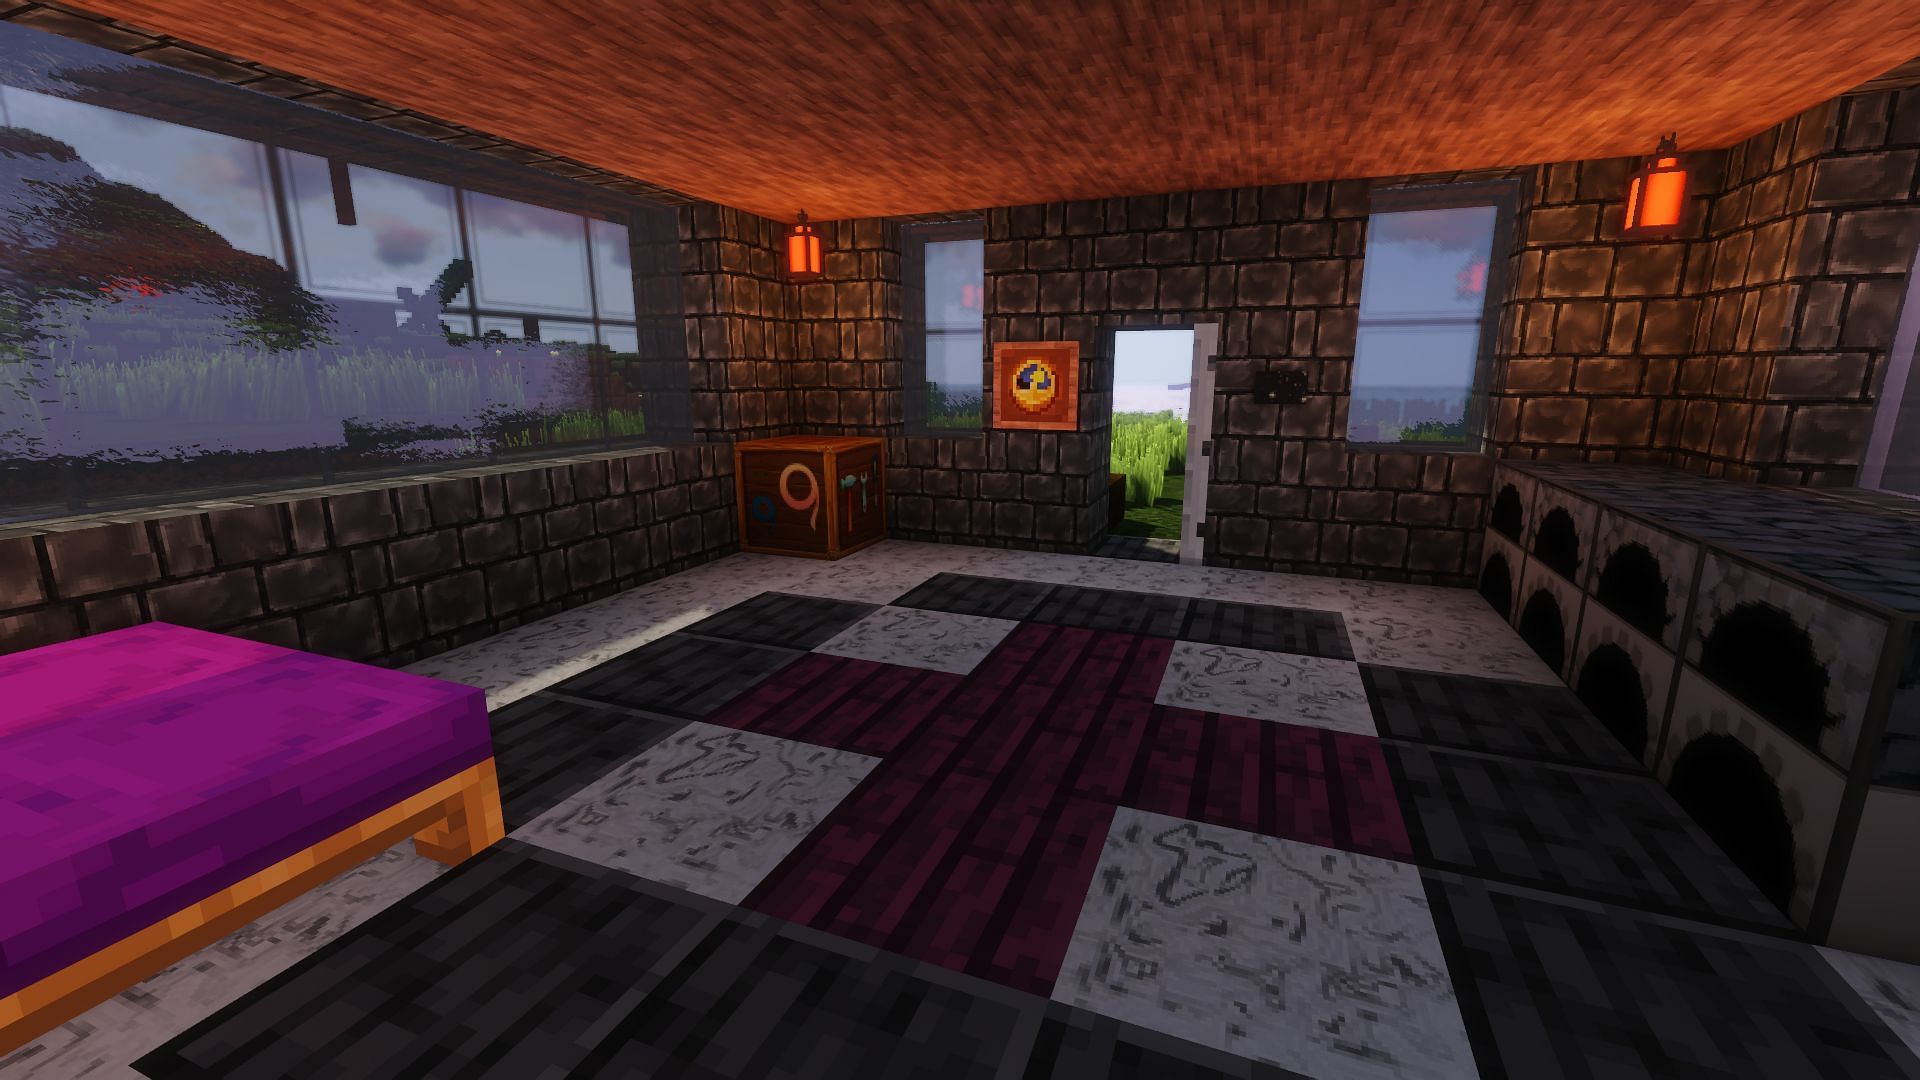 The build with the Pixelbox texture pack (Image via Minecraft)